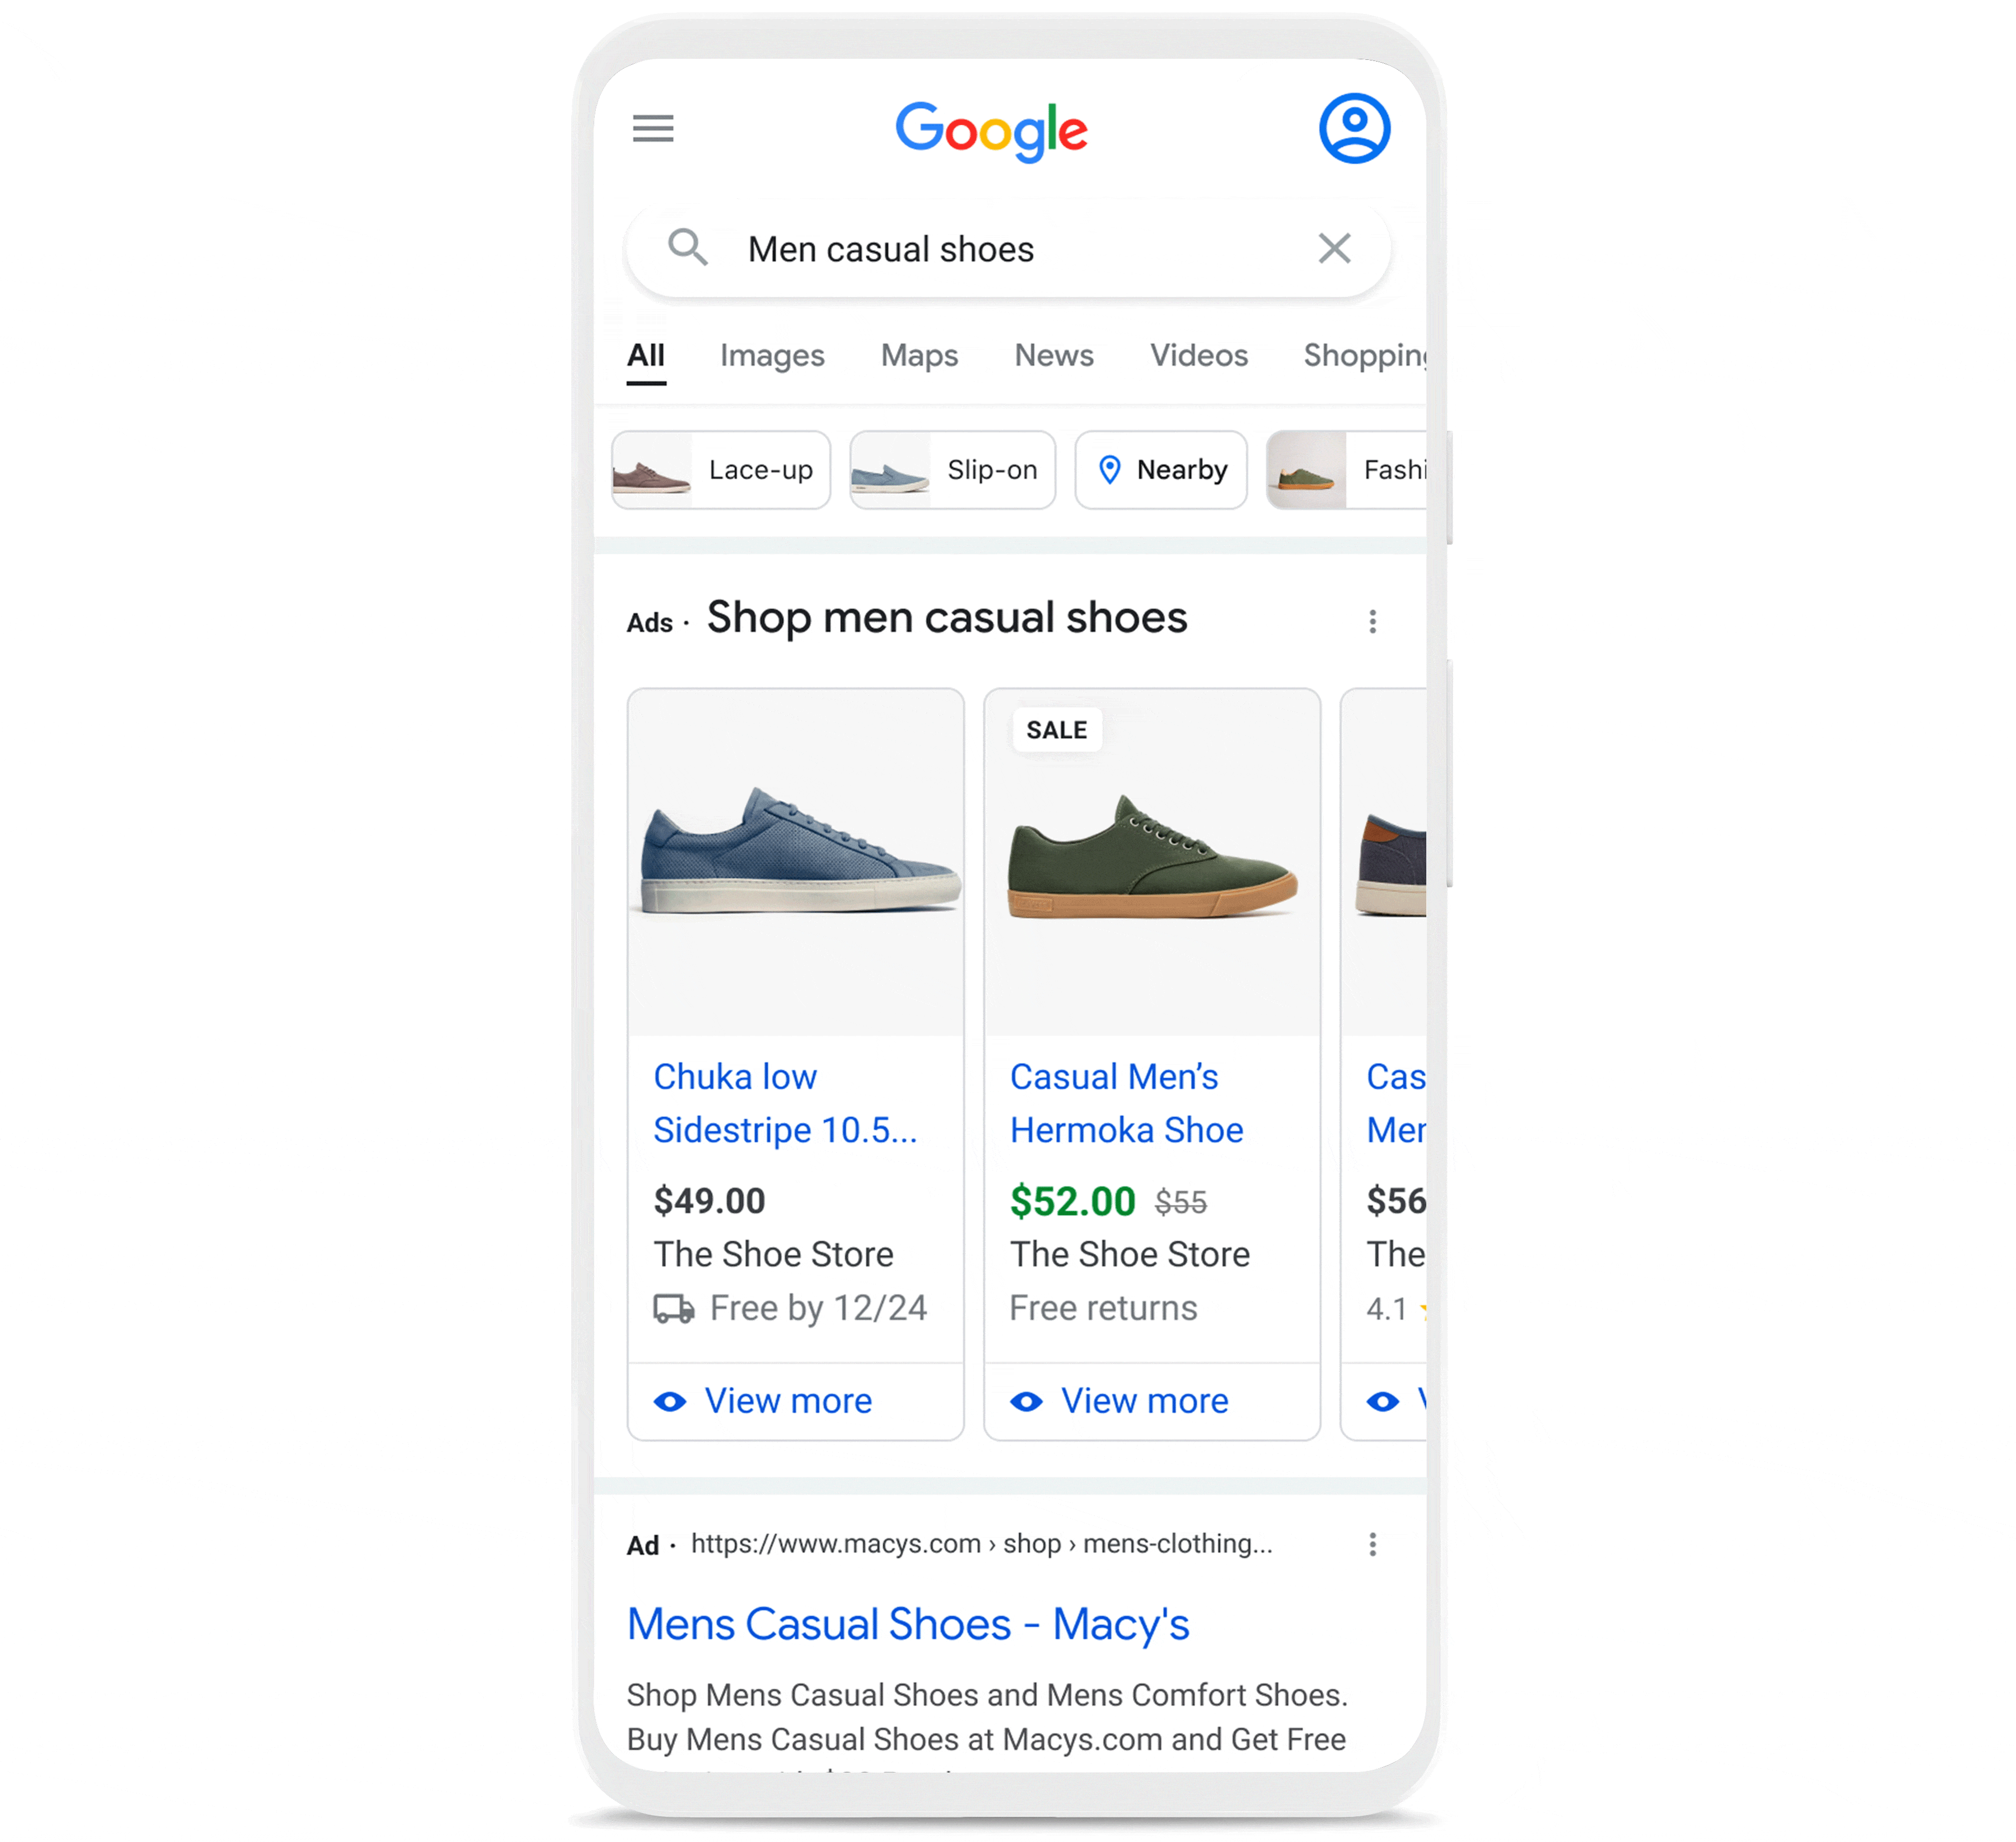 Google Ads: Listing your products on Google for leverage